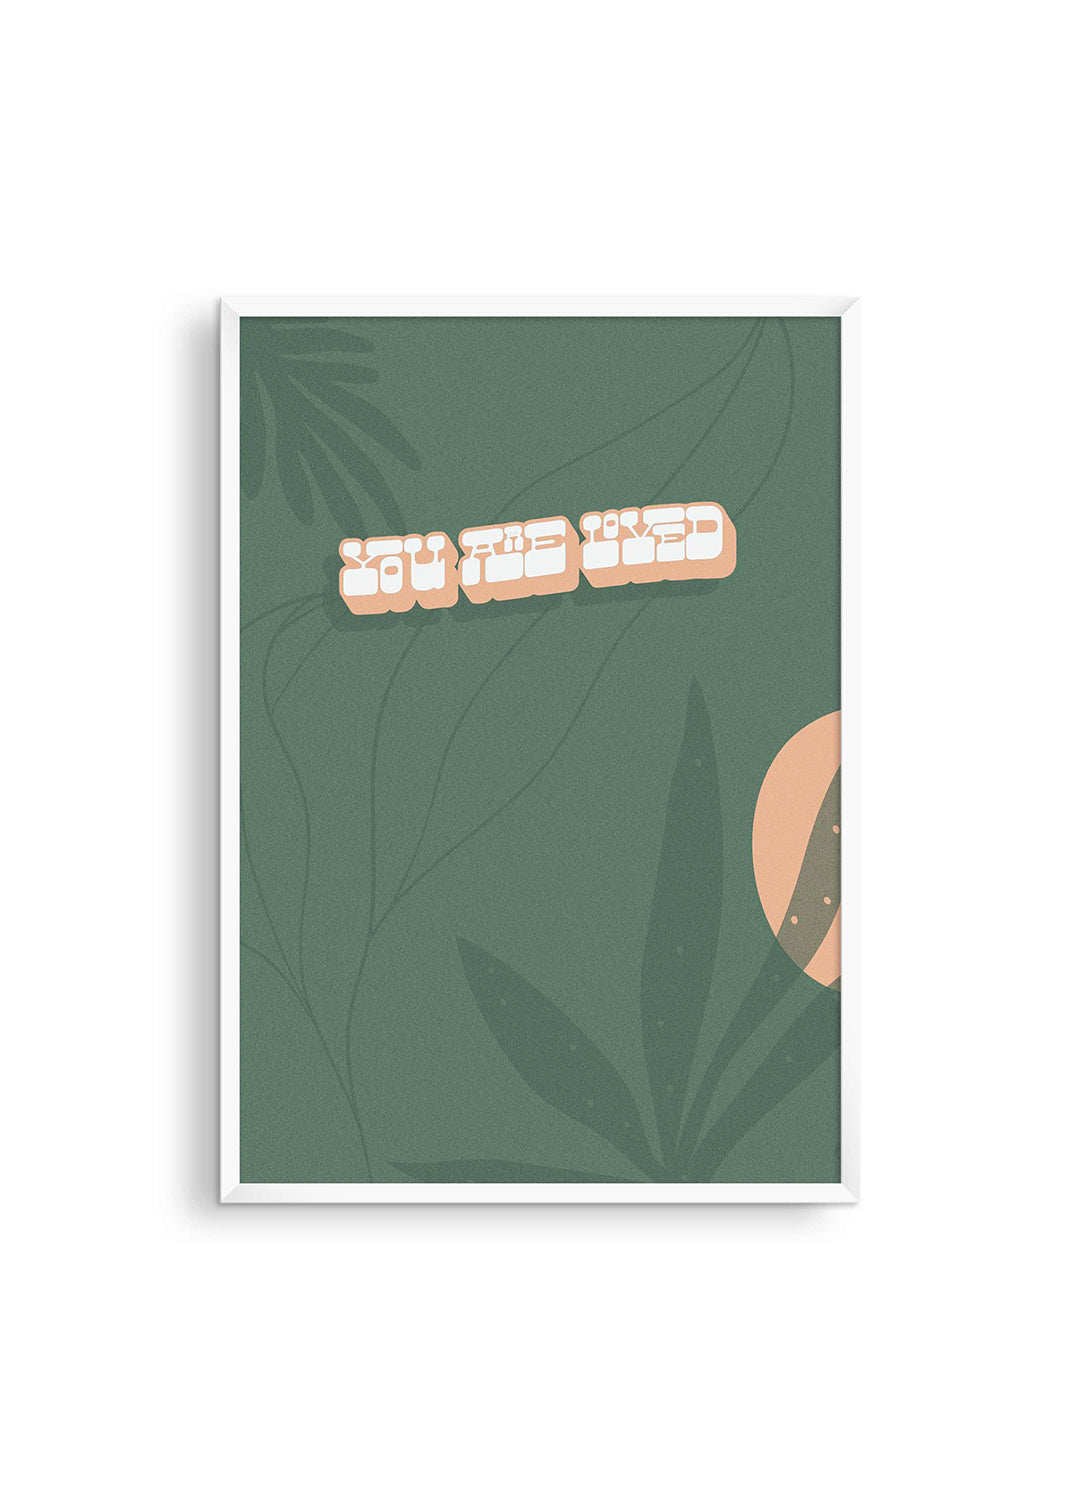 You Are Loved Print